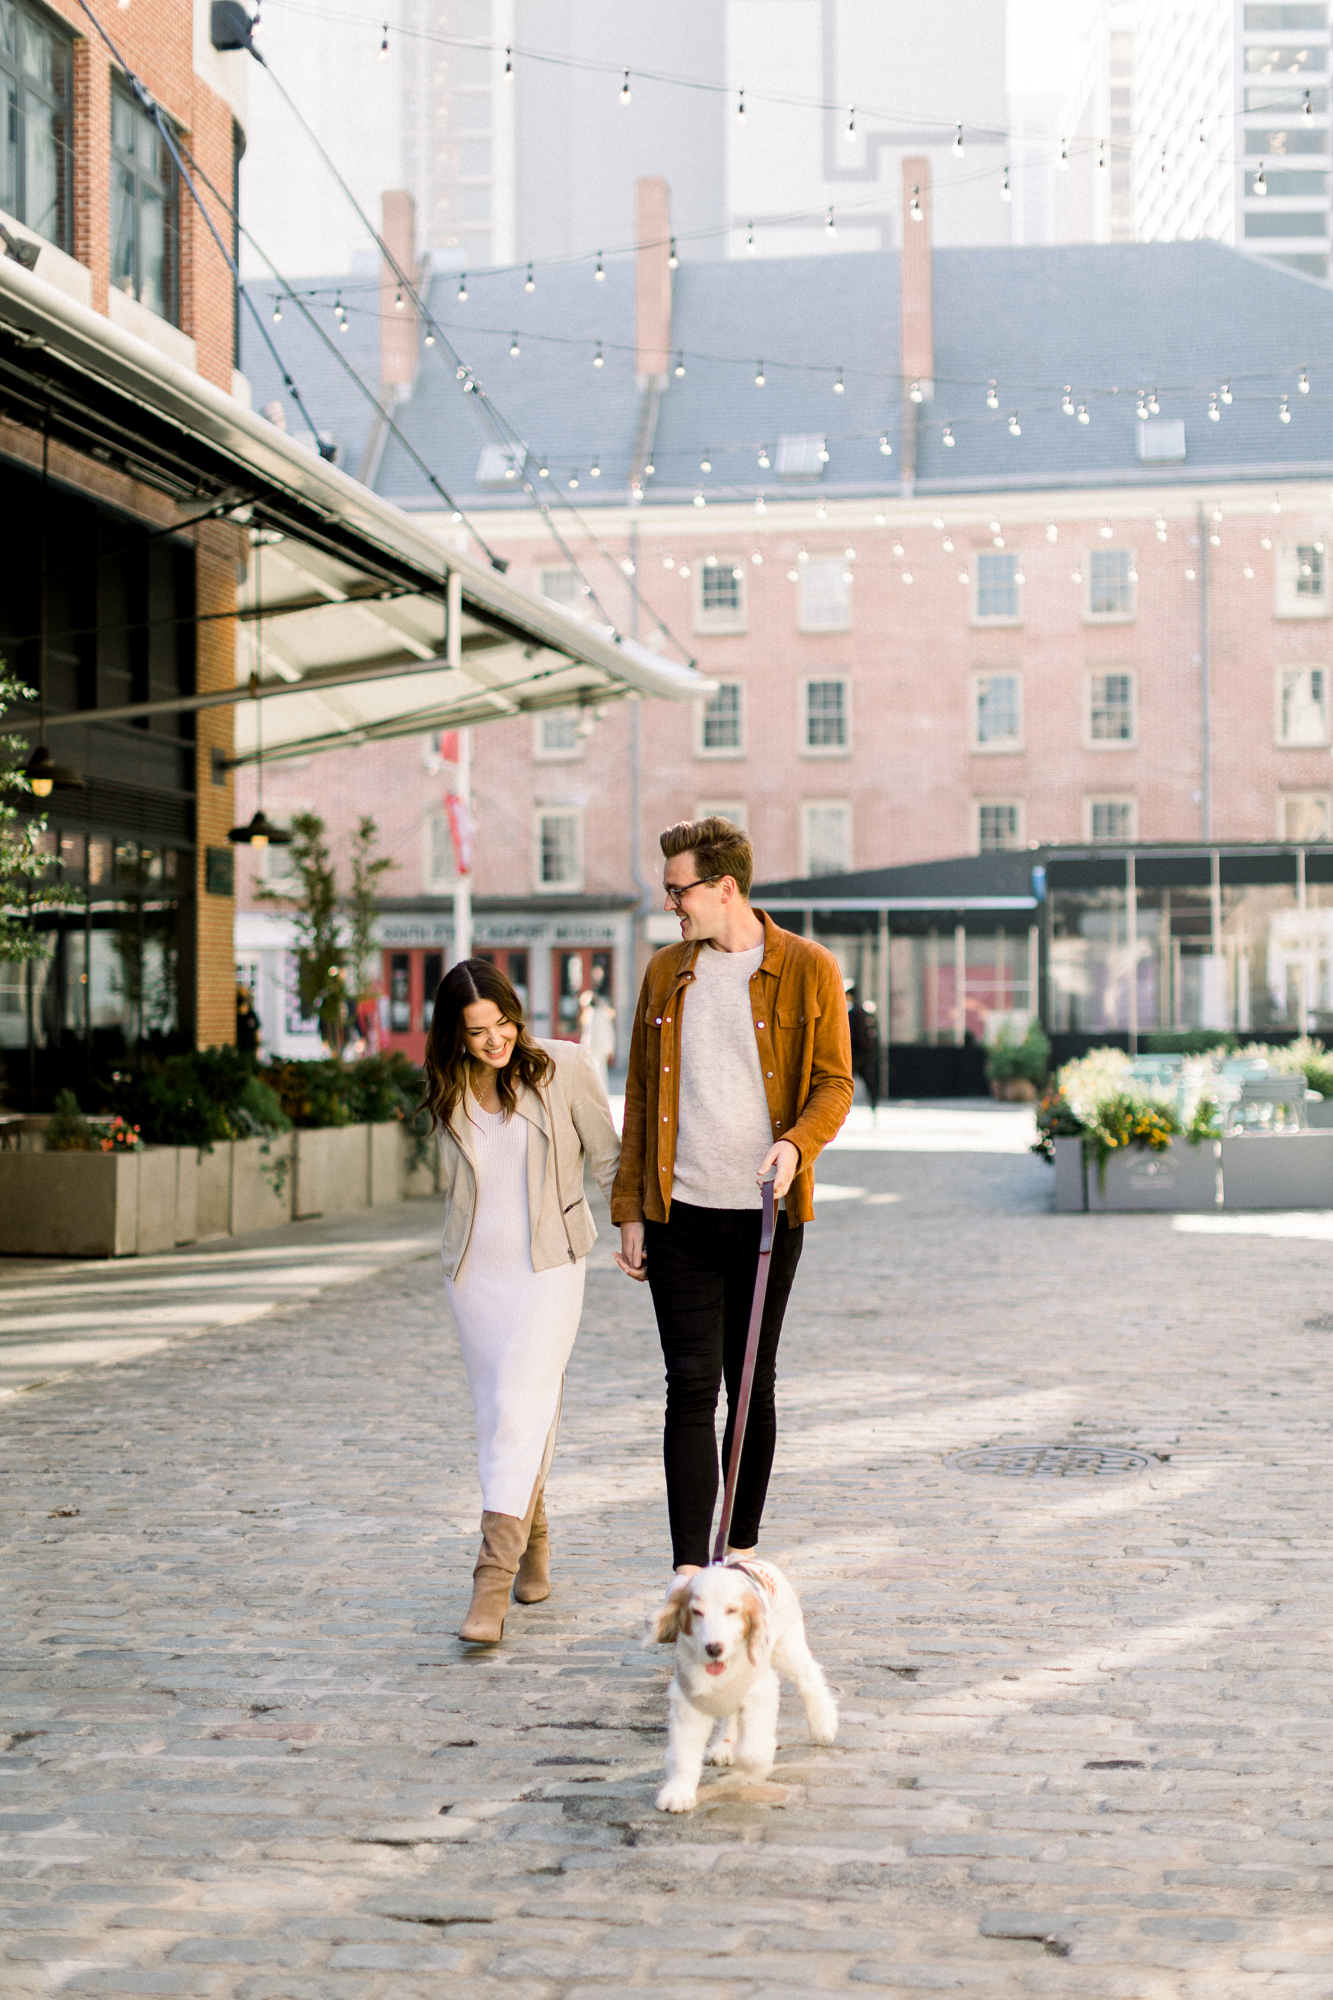 Jaw-dropping Fall Engagement Photos on South Street Near New York's Pier 17